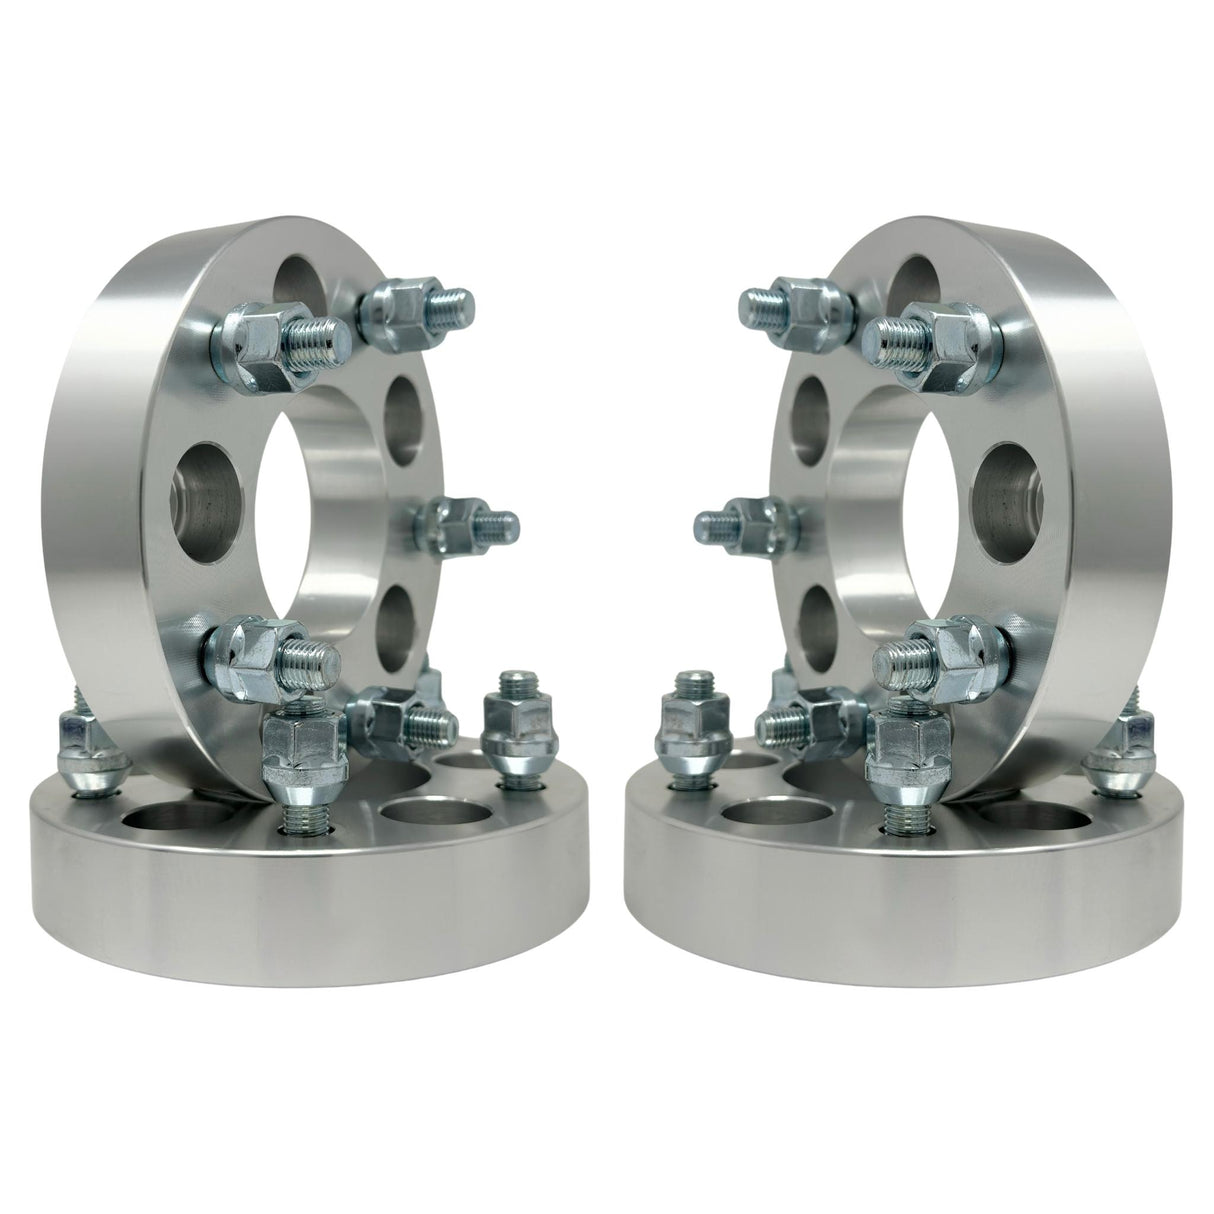 5x5 (5x127) Wheel Spacers 1.25" - 2" Inch (32-50mm) 1/2-20 Studs & Lug Nuts 74mm Center Bore